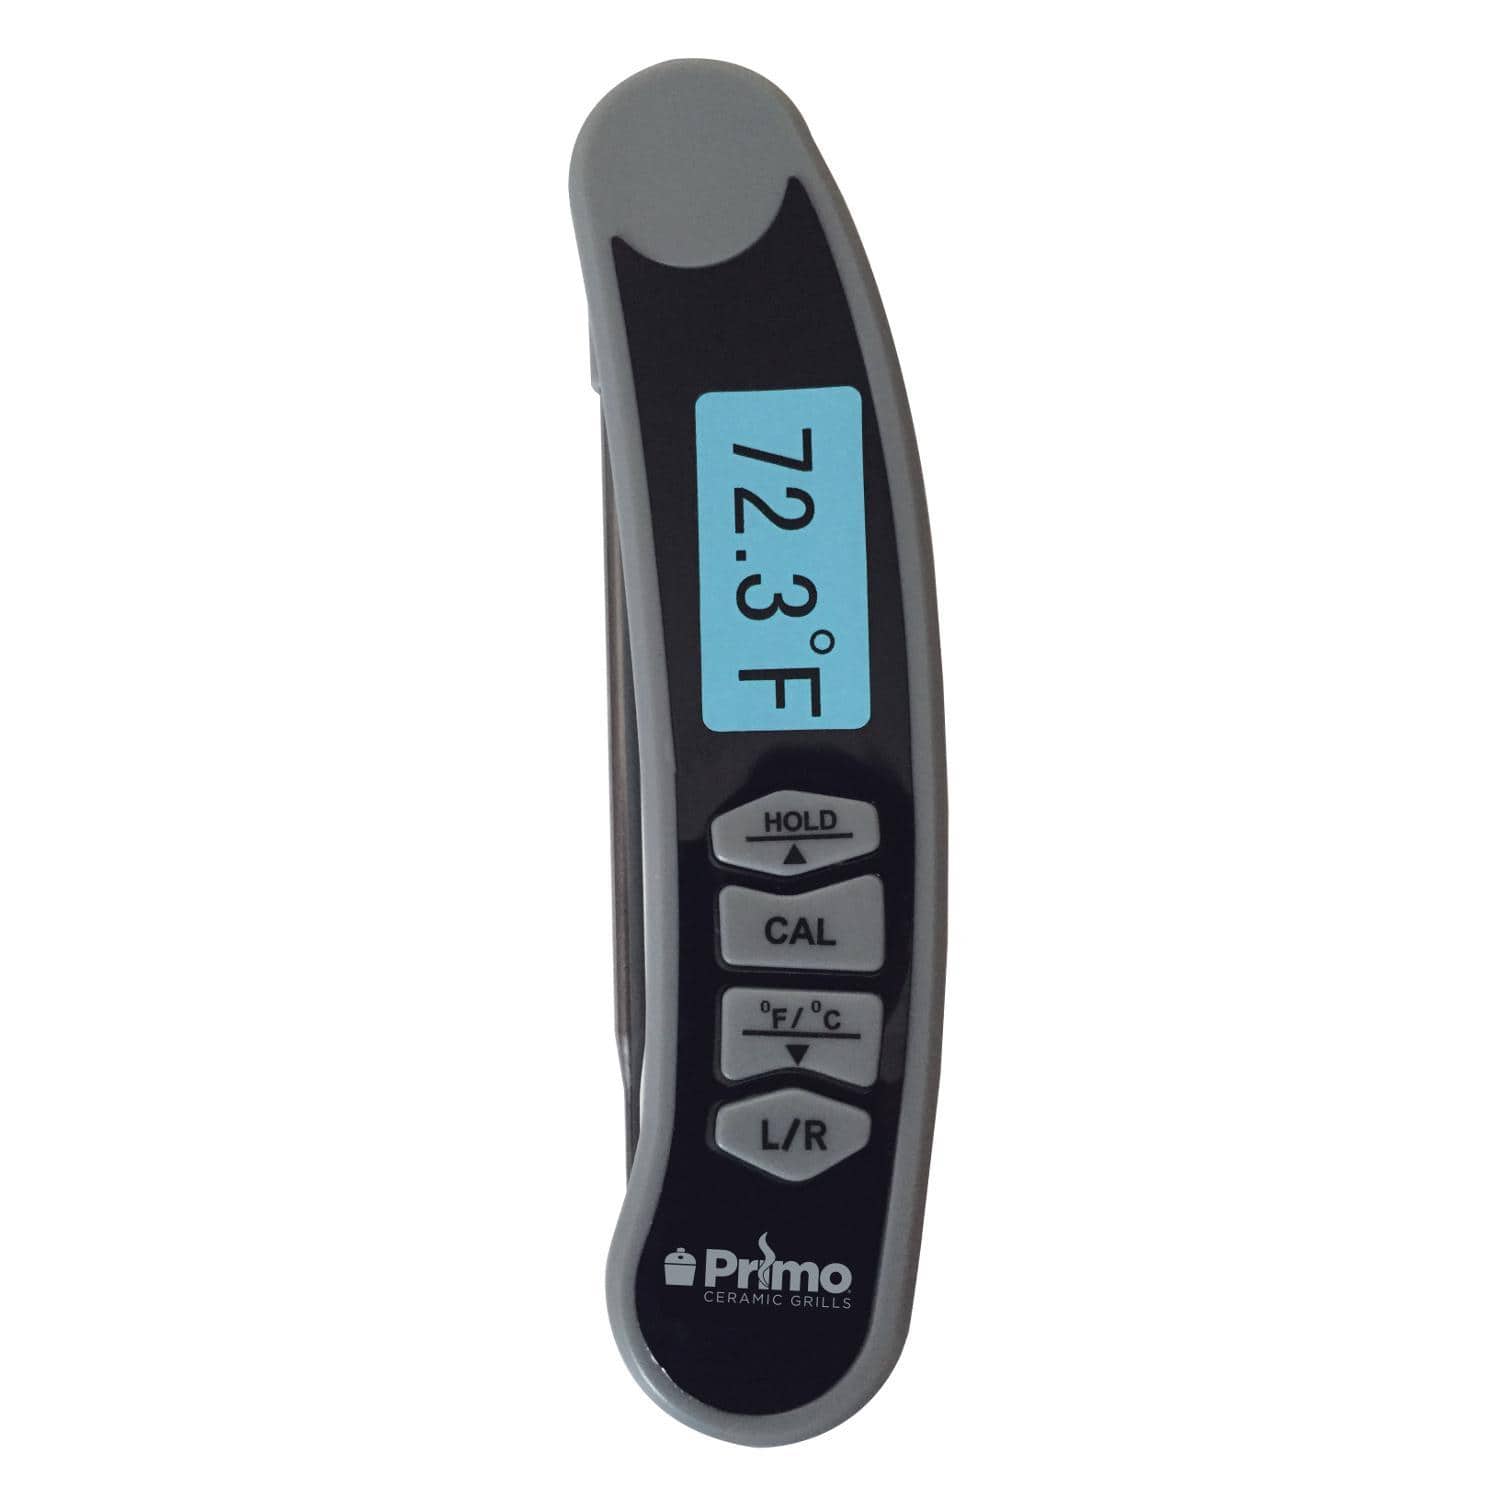 Primo Grills Primo Grills Accessories Primo Grills Instant Read Thermometer